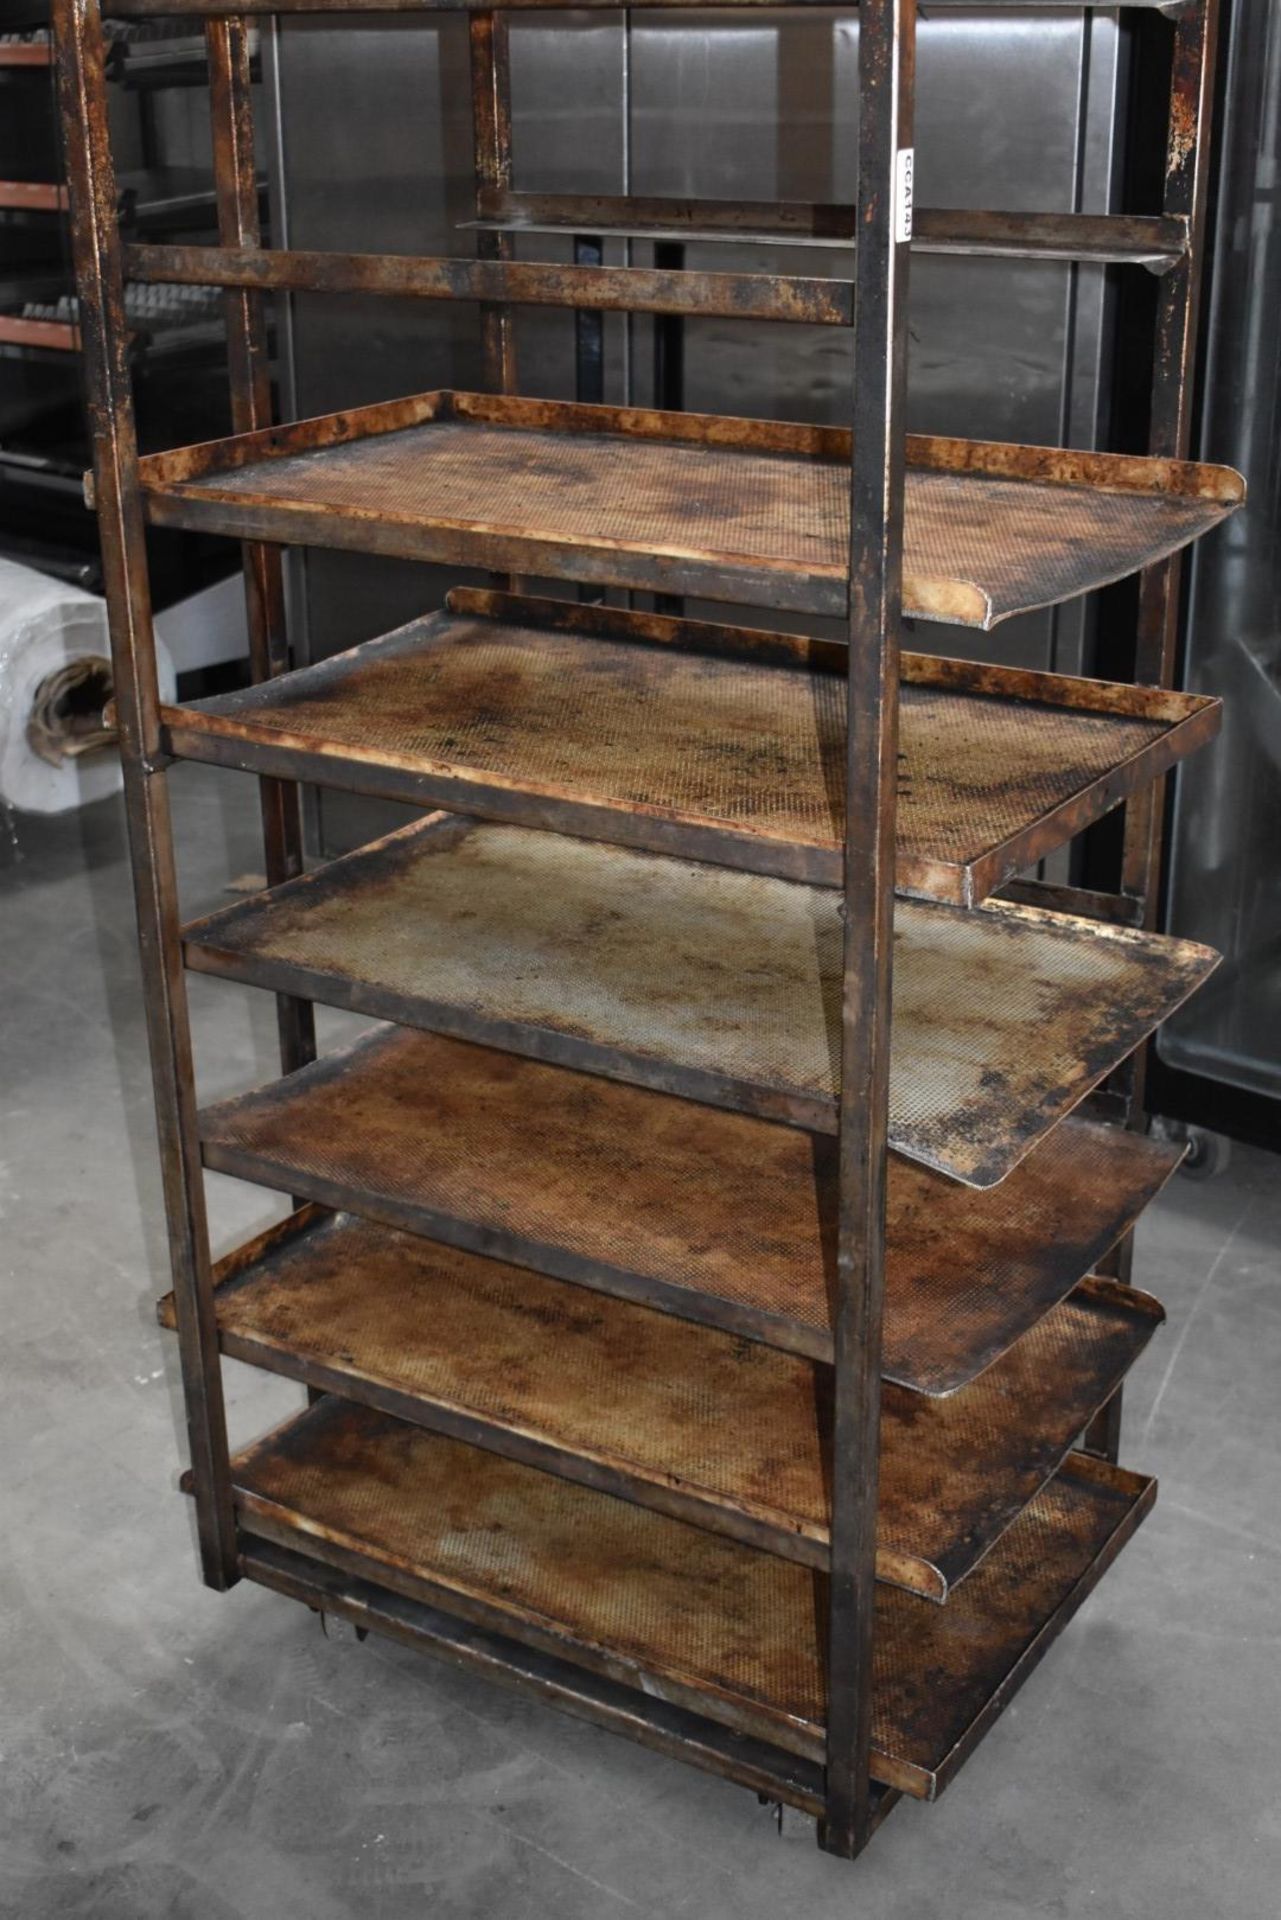 1 x Upright Mobile Baking Rack With Six Trays - Image 2 of 3